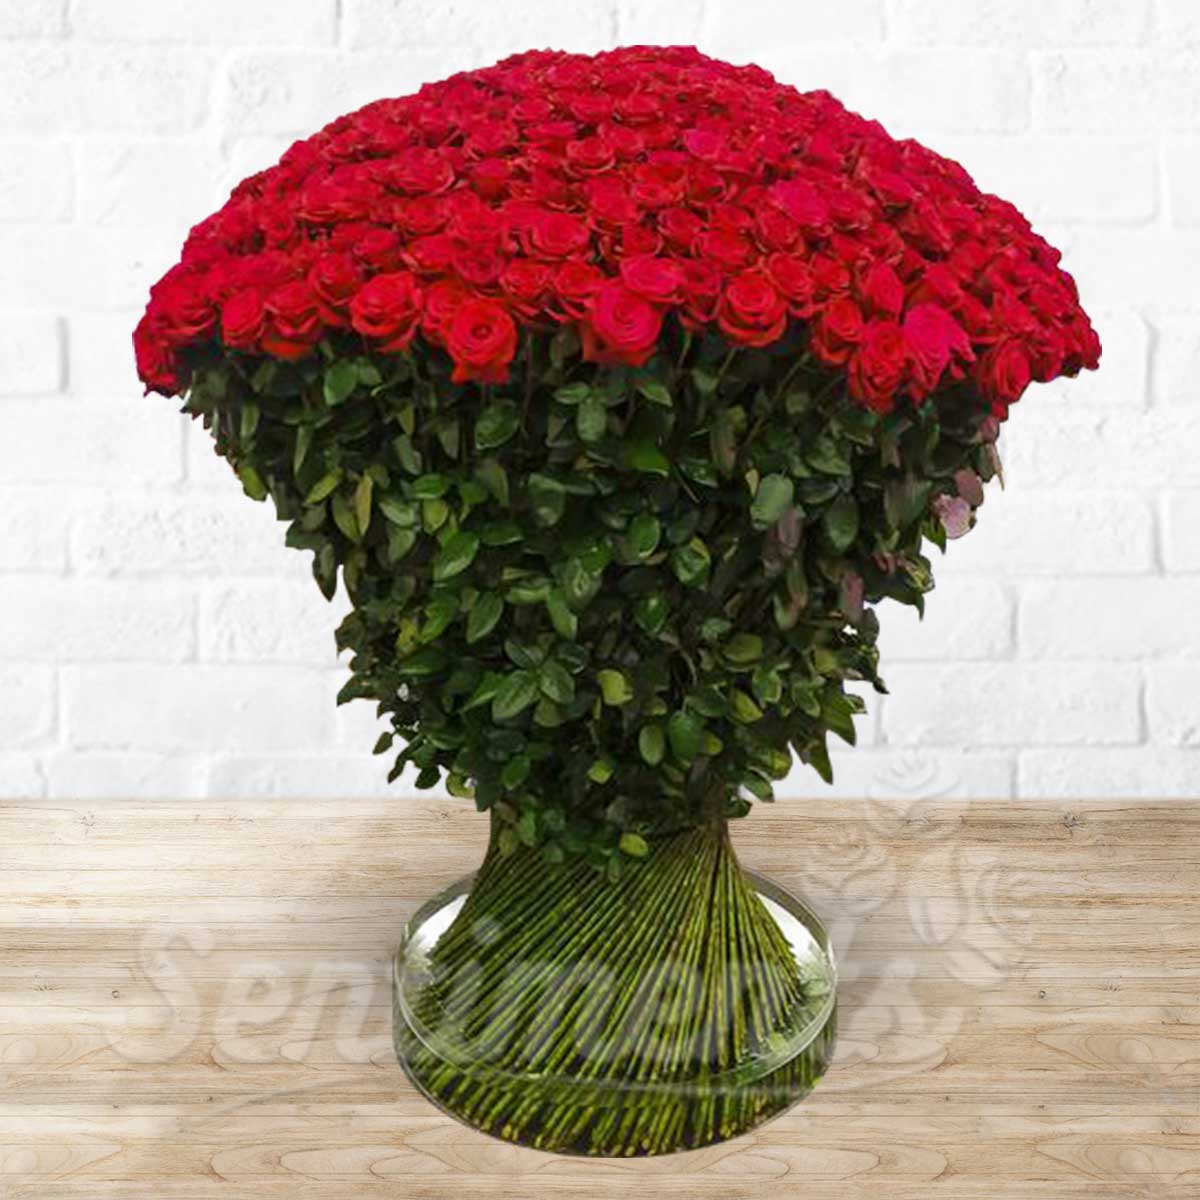 VIP LONG STEM - Luxurious Big  Red Roses Hand Bouquet - PRE ORDER - 5-7days upon delivery ( Acrylic Stand Not Included (Just for Photoshoot purposes)